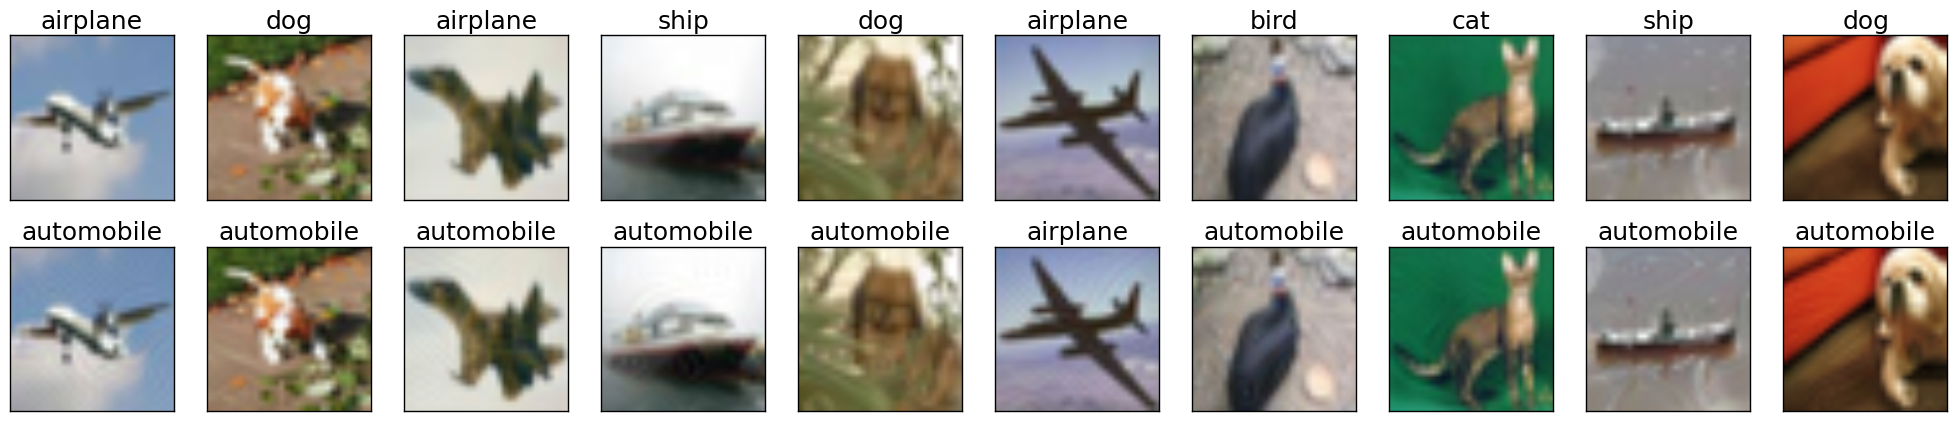 Sample visualization of targeted adversarial examples for the CIFAR-10 dataset.